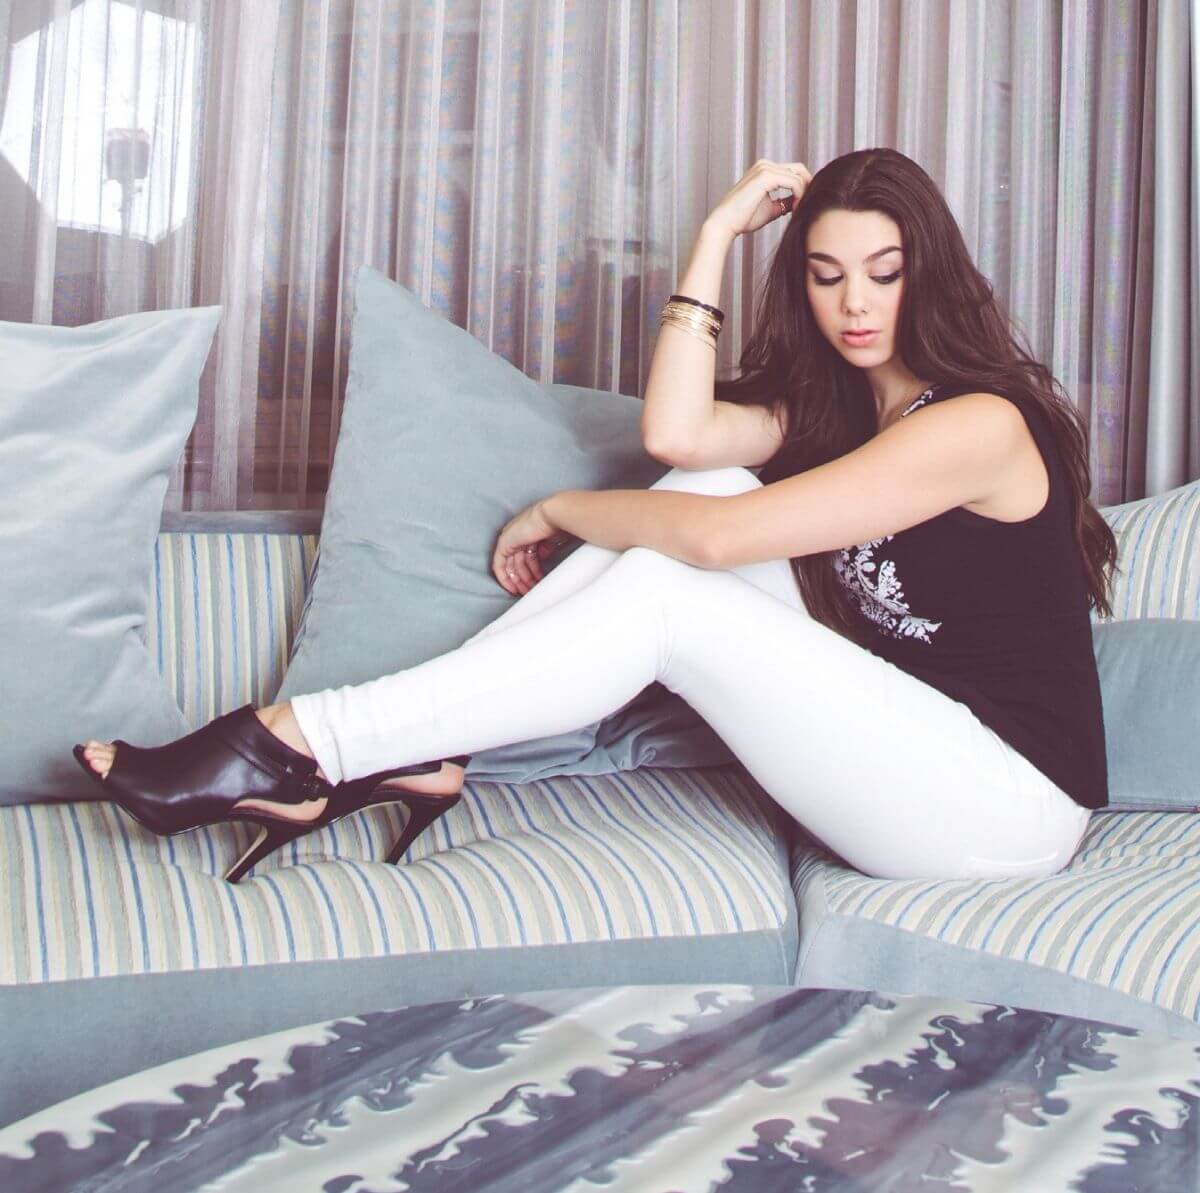 49 Sexy Kira Kosarin Feet Pictures Will Get You All Sweating | Best Of Comic Books